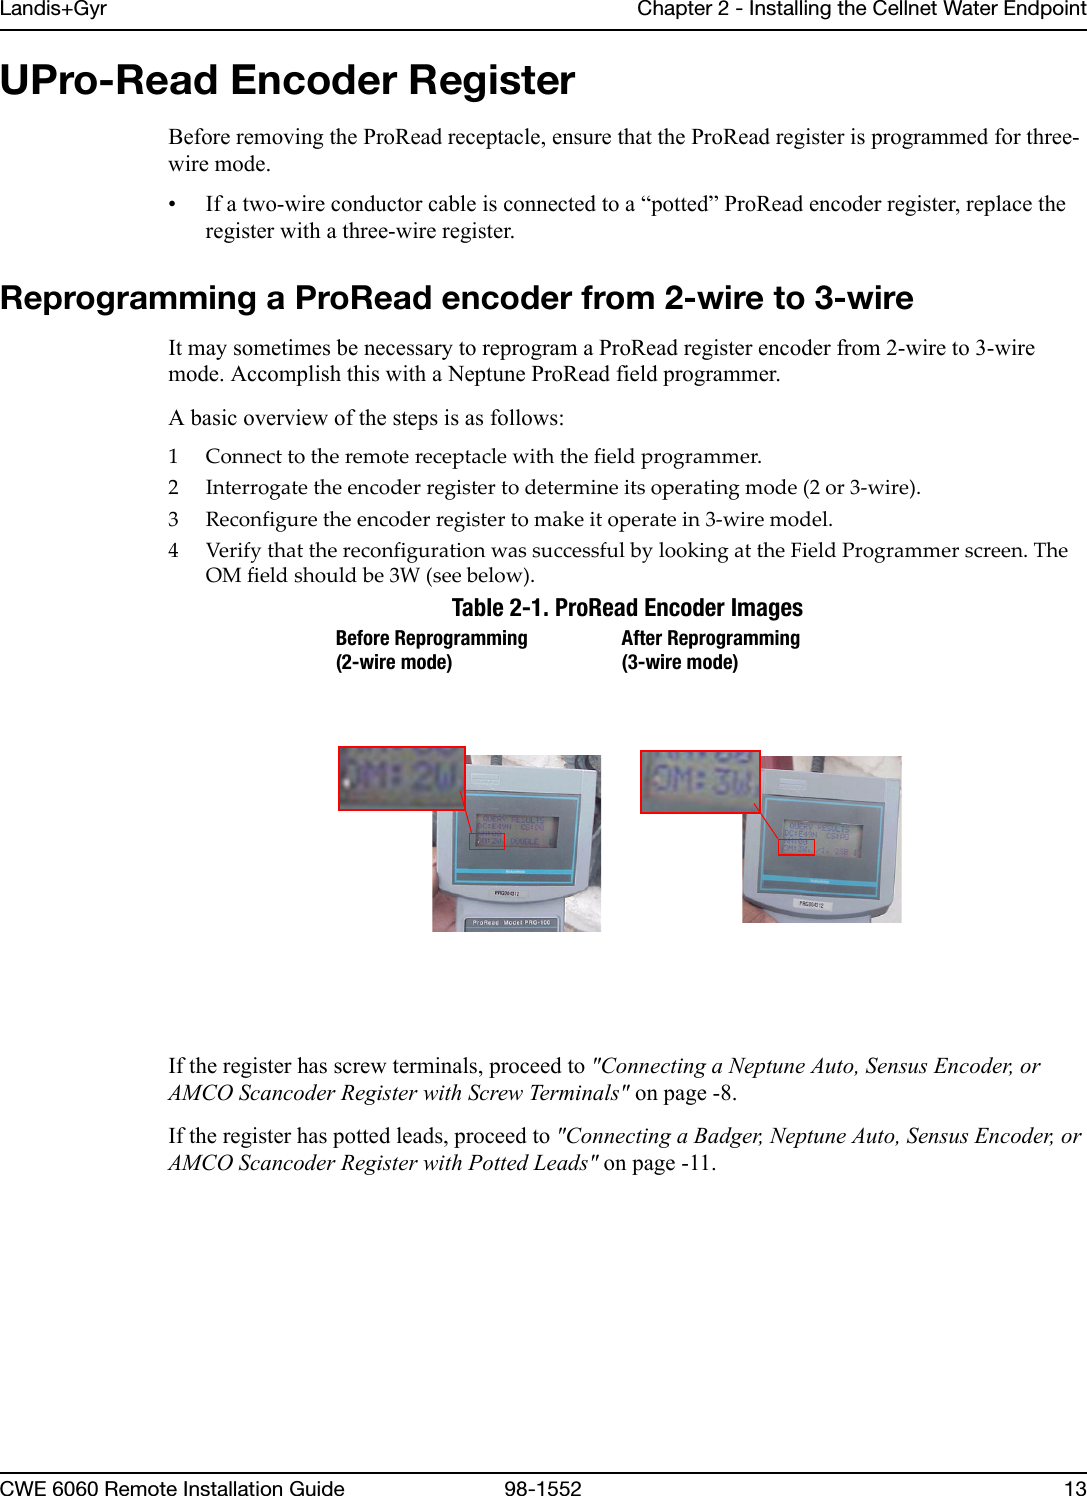 Landis+Gyr Chapter 2 - Installing the Cellnet Water EndpointCWE 6060 Remote Installation Guide 98-1552 13UPro-Read Encoder RegisterBefore removing the ProRead receptacle, ensure that the ProRead register is programmed for three-wire mode.• If a two-wire conductor cable is connected to a “potted” ProRead encoder register, replace the register with a three-wire register. Reprogramming a ProRead encoder from 2-wire to 3-wireIt may sometimes be necessary to reprogram a ProRead register encoder from 2-wire to 3-wire mode. Accomplish this with a Neptune ProRead field programmer.A basic overview of the steps is as follows:1 Connecttotheremotereceptaclewiththefieldprogrammer.2 Interrogatetheencoderregistertodetermineitsoperatingmode(2or3‐wire).3 Reconfiguretheencoderregistertomakeitoperatein3‐wiremodel.4VerifythatthereconfigurationwassuccessfulbylookingattheFieldProgrammerscreen.TheOMfieldshouldbe3W(seebelow).Table 2-1. ProRead Encoder ImagesIf the register has screw terminals, proceed to &quot;Connecting a Neptune Auto, Sensus Encoder, or AMCO Scancoder Register with Screw Terminals&quot; on page -8.If the register has potted leads, proceed to &quot;Connecting a Badger, Neptune Auto, Sensus Encoder, or AMCO Scancoder Register with Potted Leads&quot; on page -11.Before Reprogramming (2-wire mode)After Reprogramming (3-wire mode)